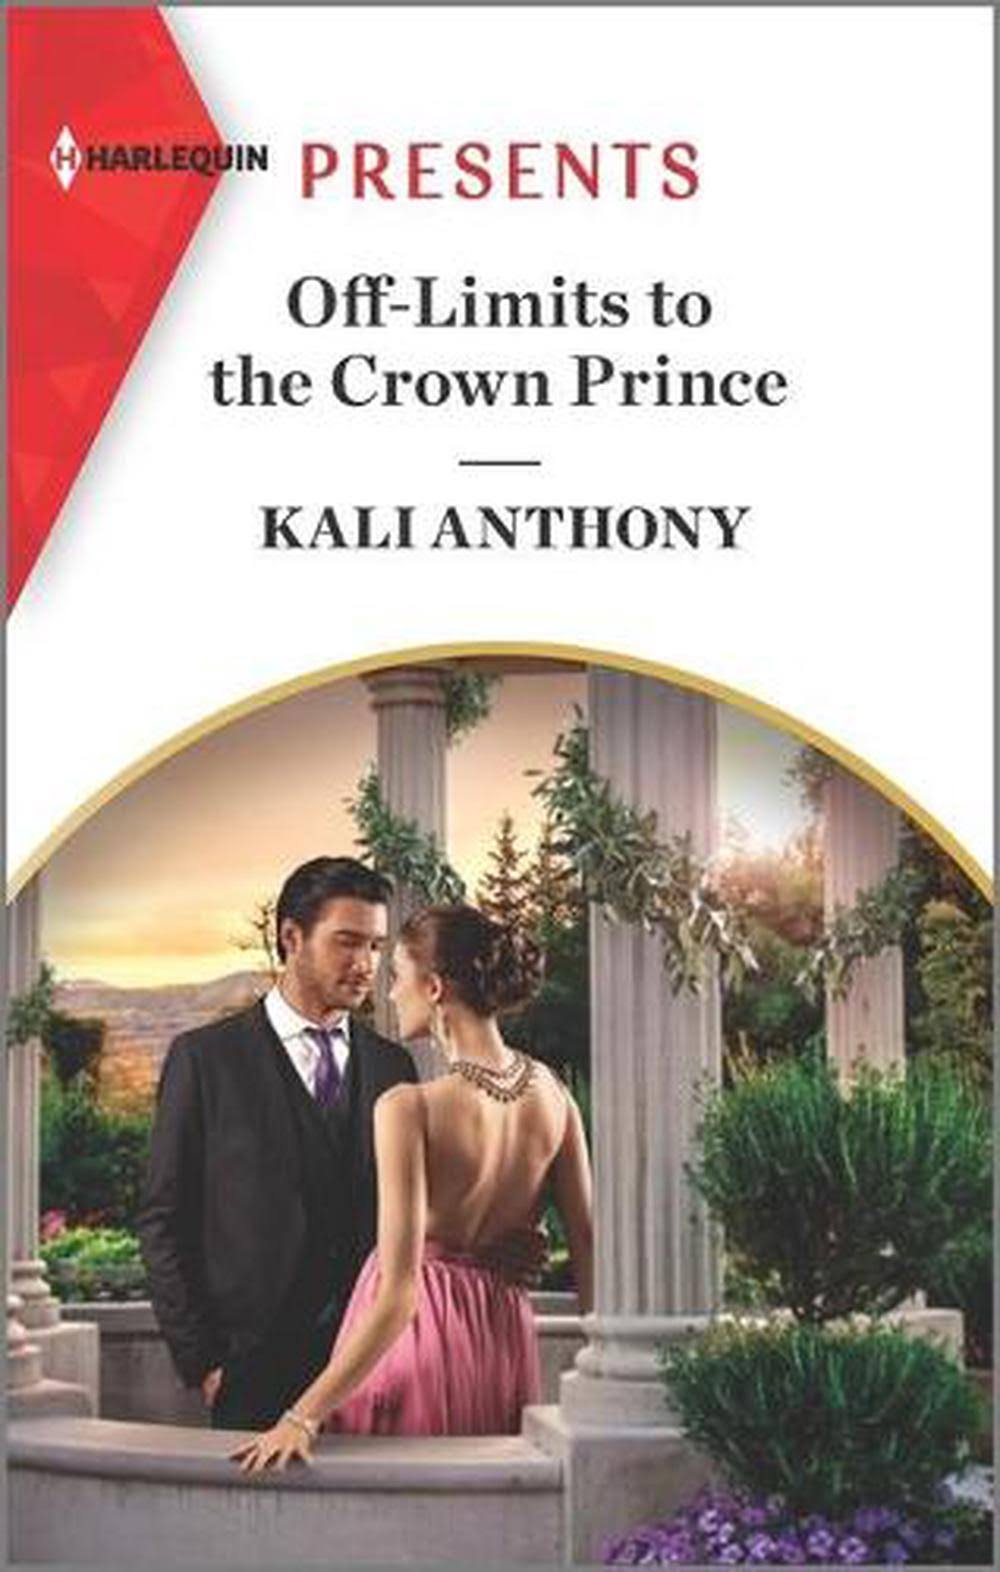 Off-Limits to The Crown Prince by Kali Anthony